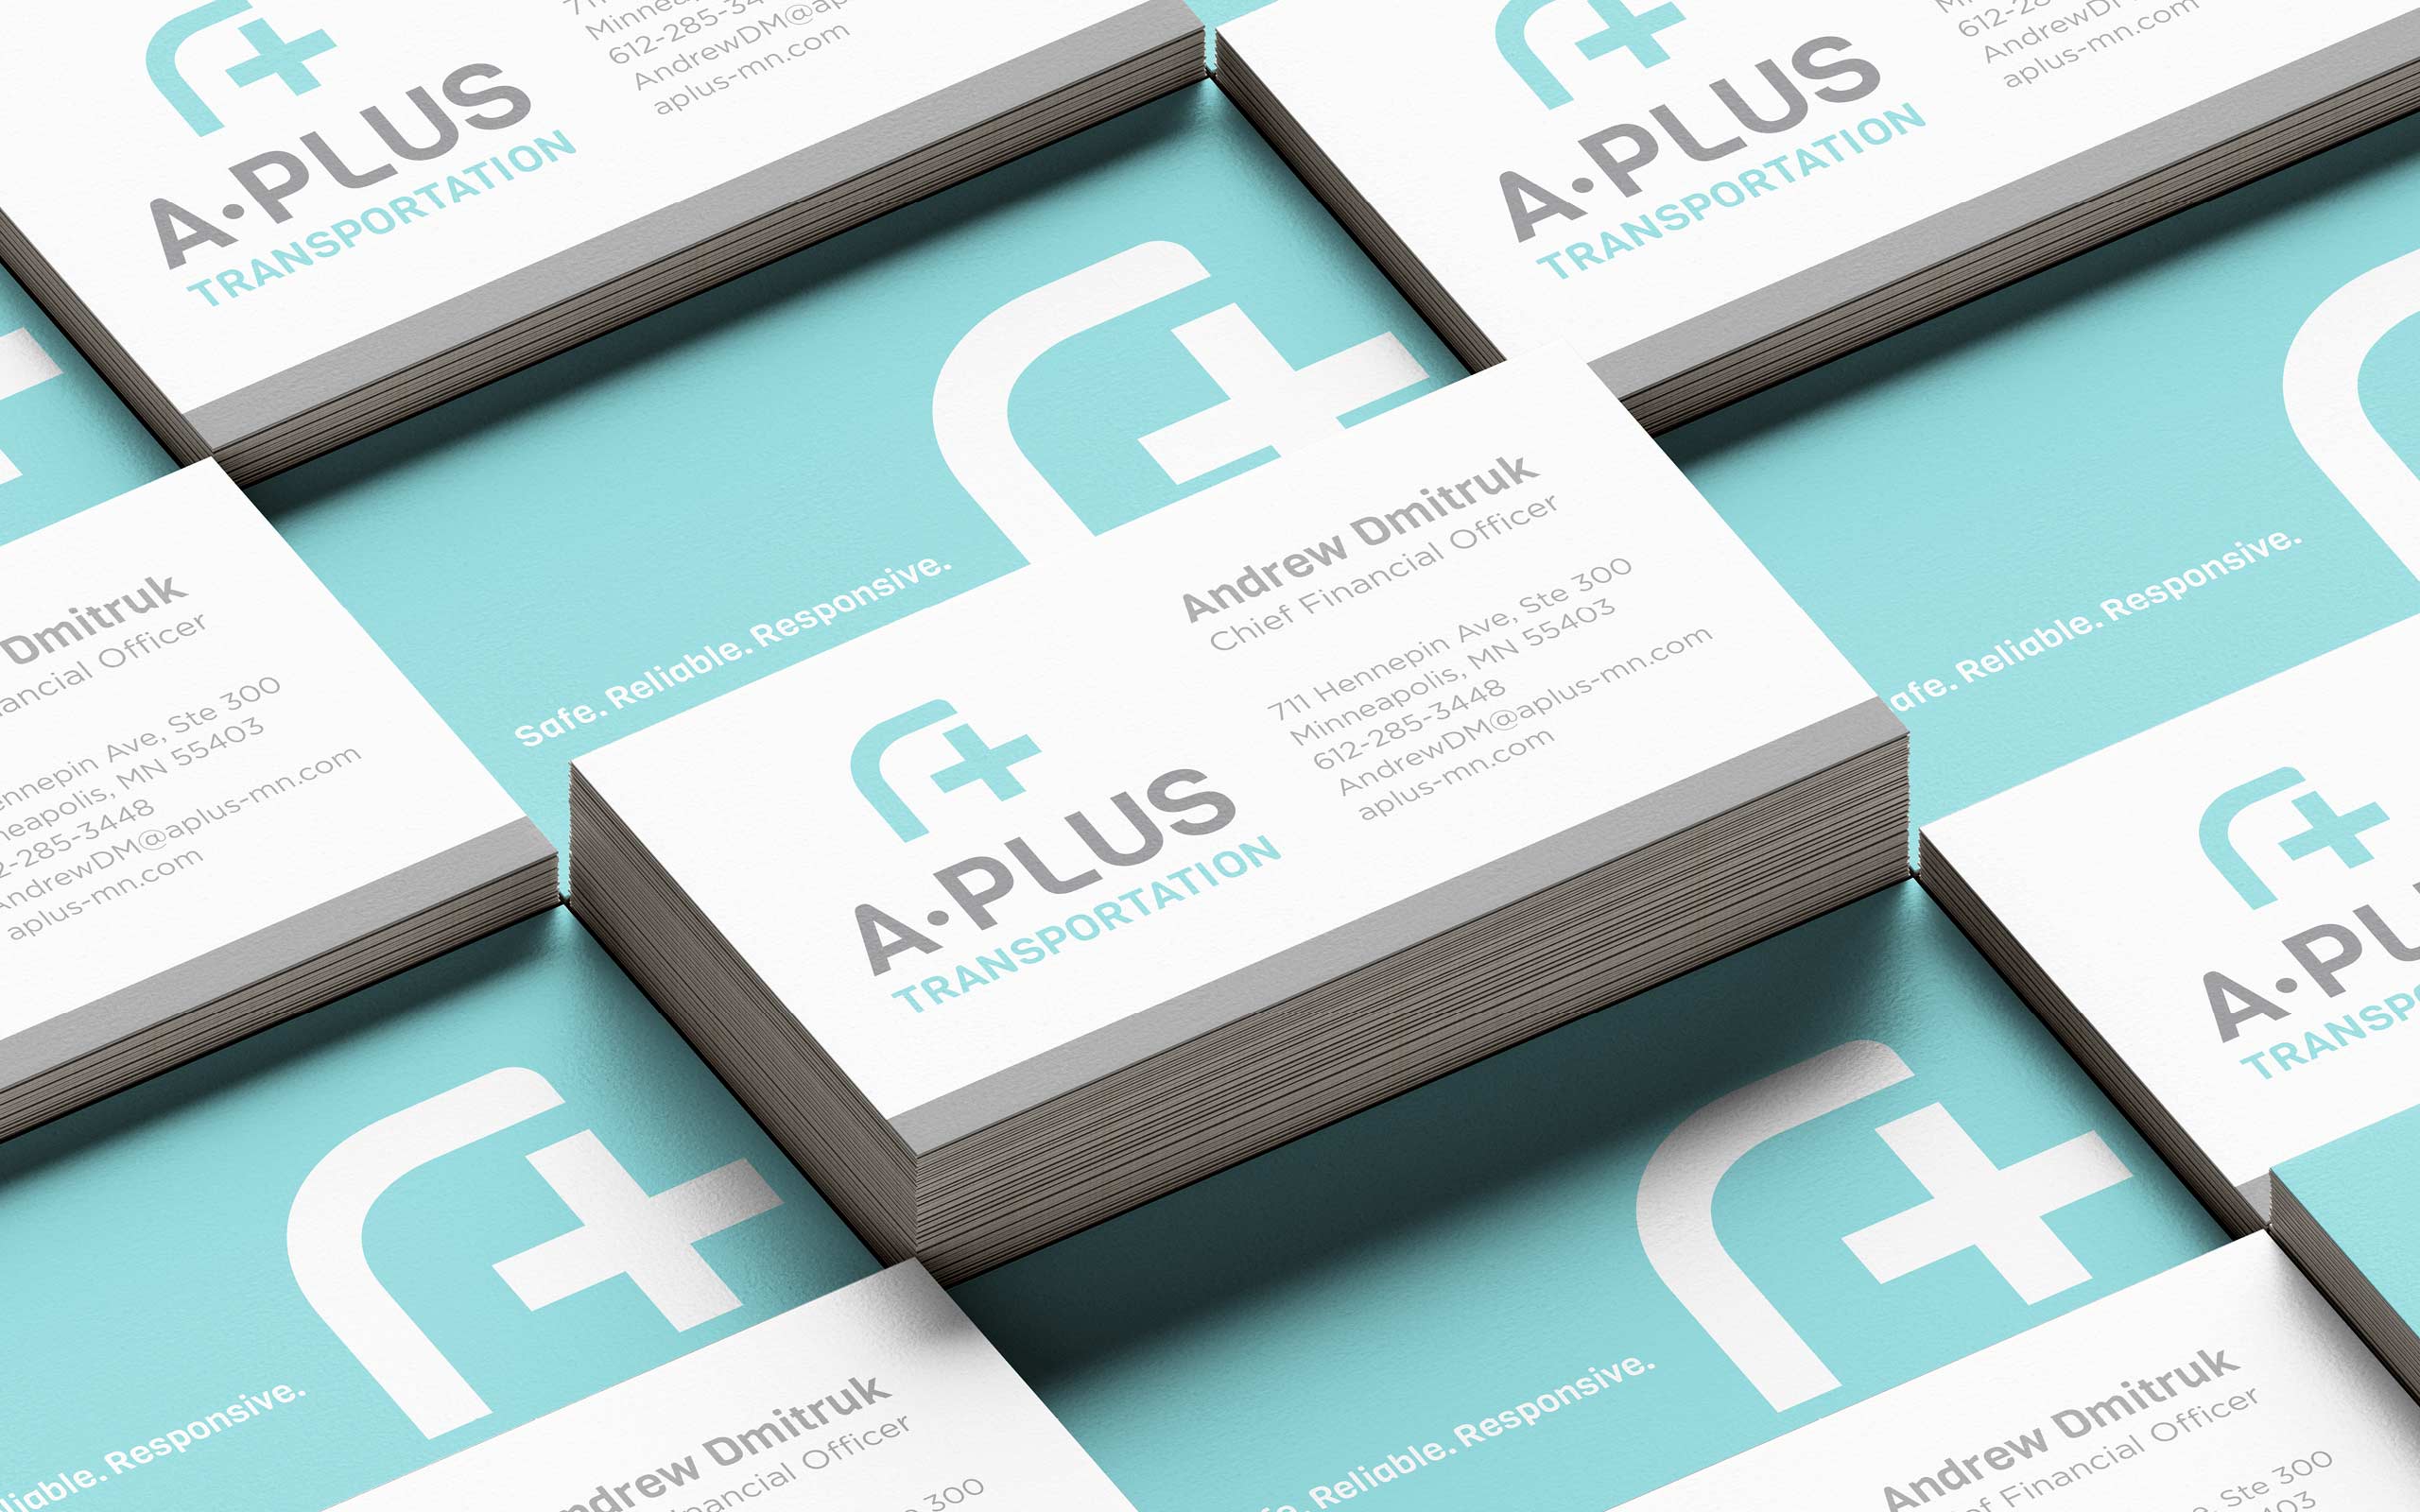 Stacks of A-Plus business cards, arranged in a grid.